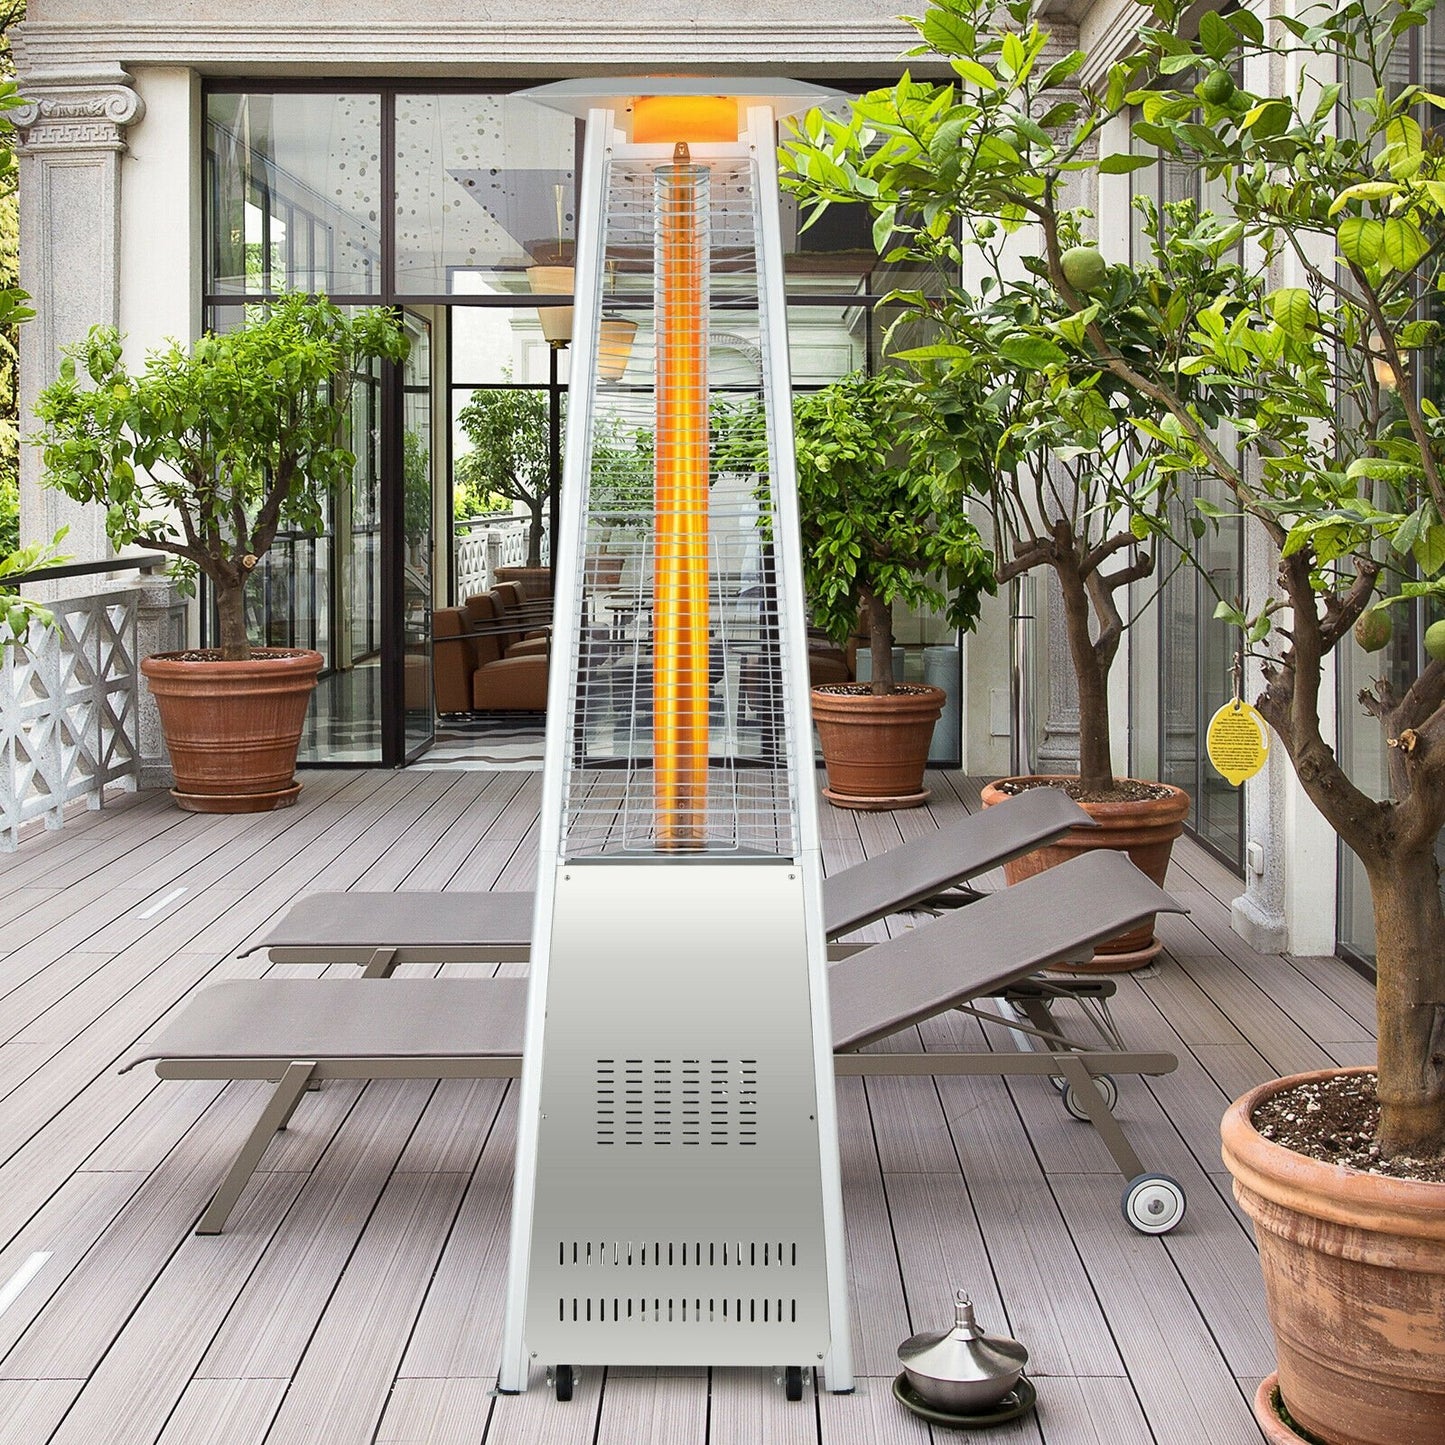 42 000 BTU Stainless Steel Pyramid Patio Heater With Wheels, Silver